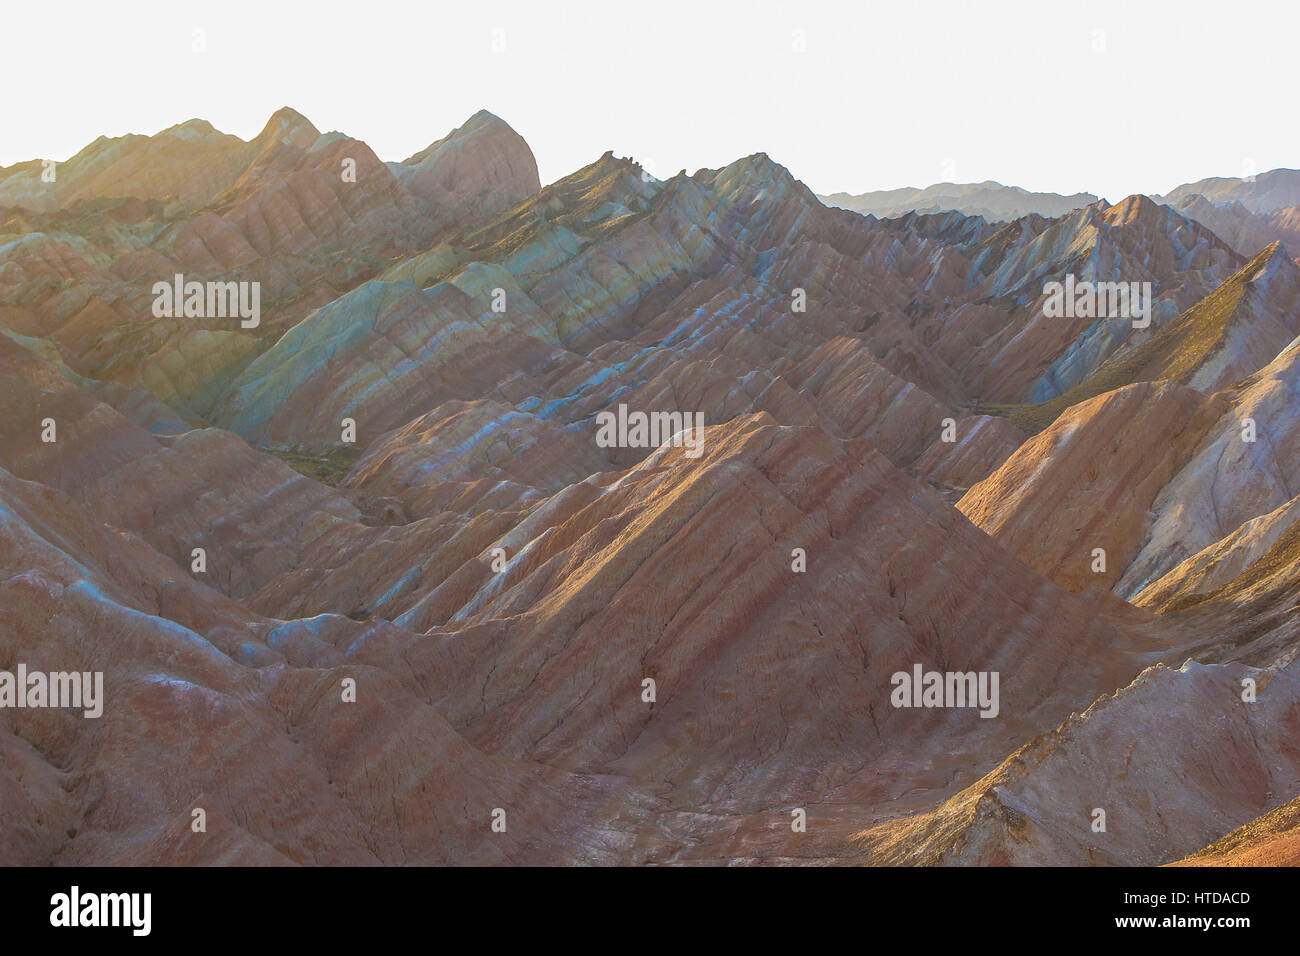 Zhangye, China. 10th Mar, 2017. Zhangye Danxia Landform Geographical Park, listed as UNESCO World Heritage Site in 2009, is located in Zhangye, northwest China's Gansu Province. Zhangye Danxia Landform is famous for the spectacular colorful mountain range of rock formation with mixed colors of red, yellow, blue, white, green. It took more than 24 million years of arduous deposition of mineral settlings with different colors to form layers. Credit: SIPA Asia/ZUMA Wire/Alamy Live News Stock Photo